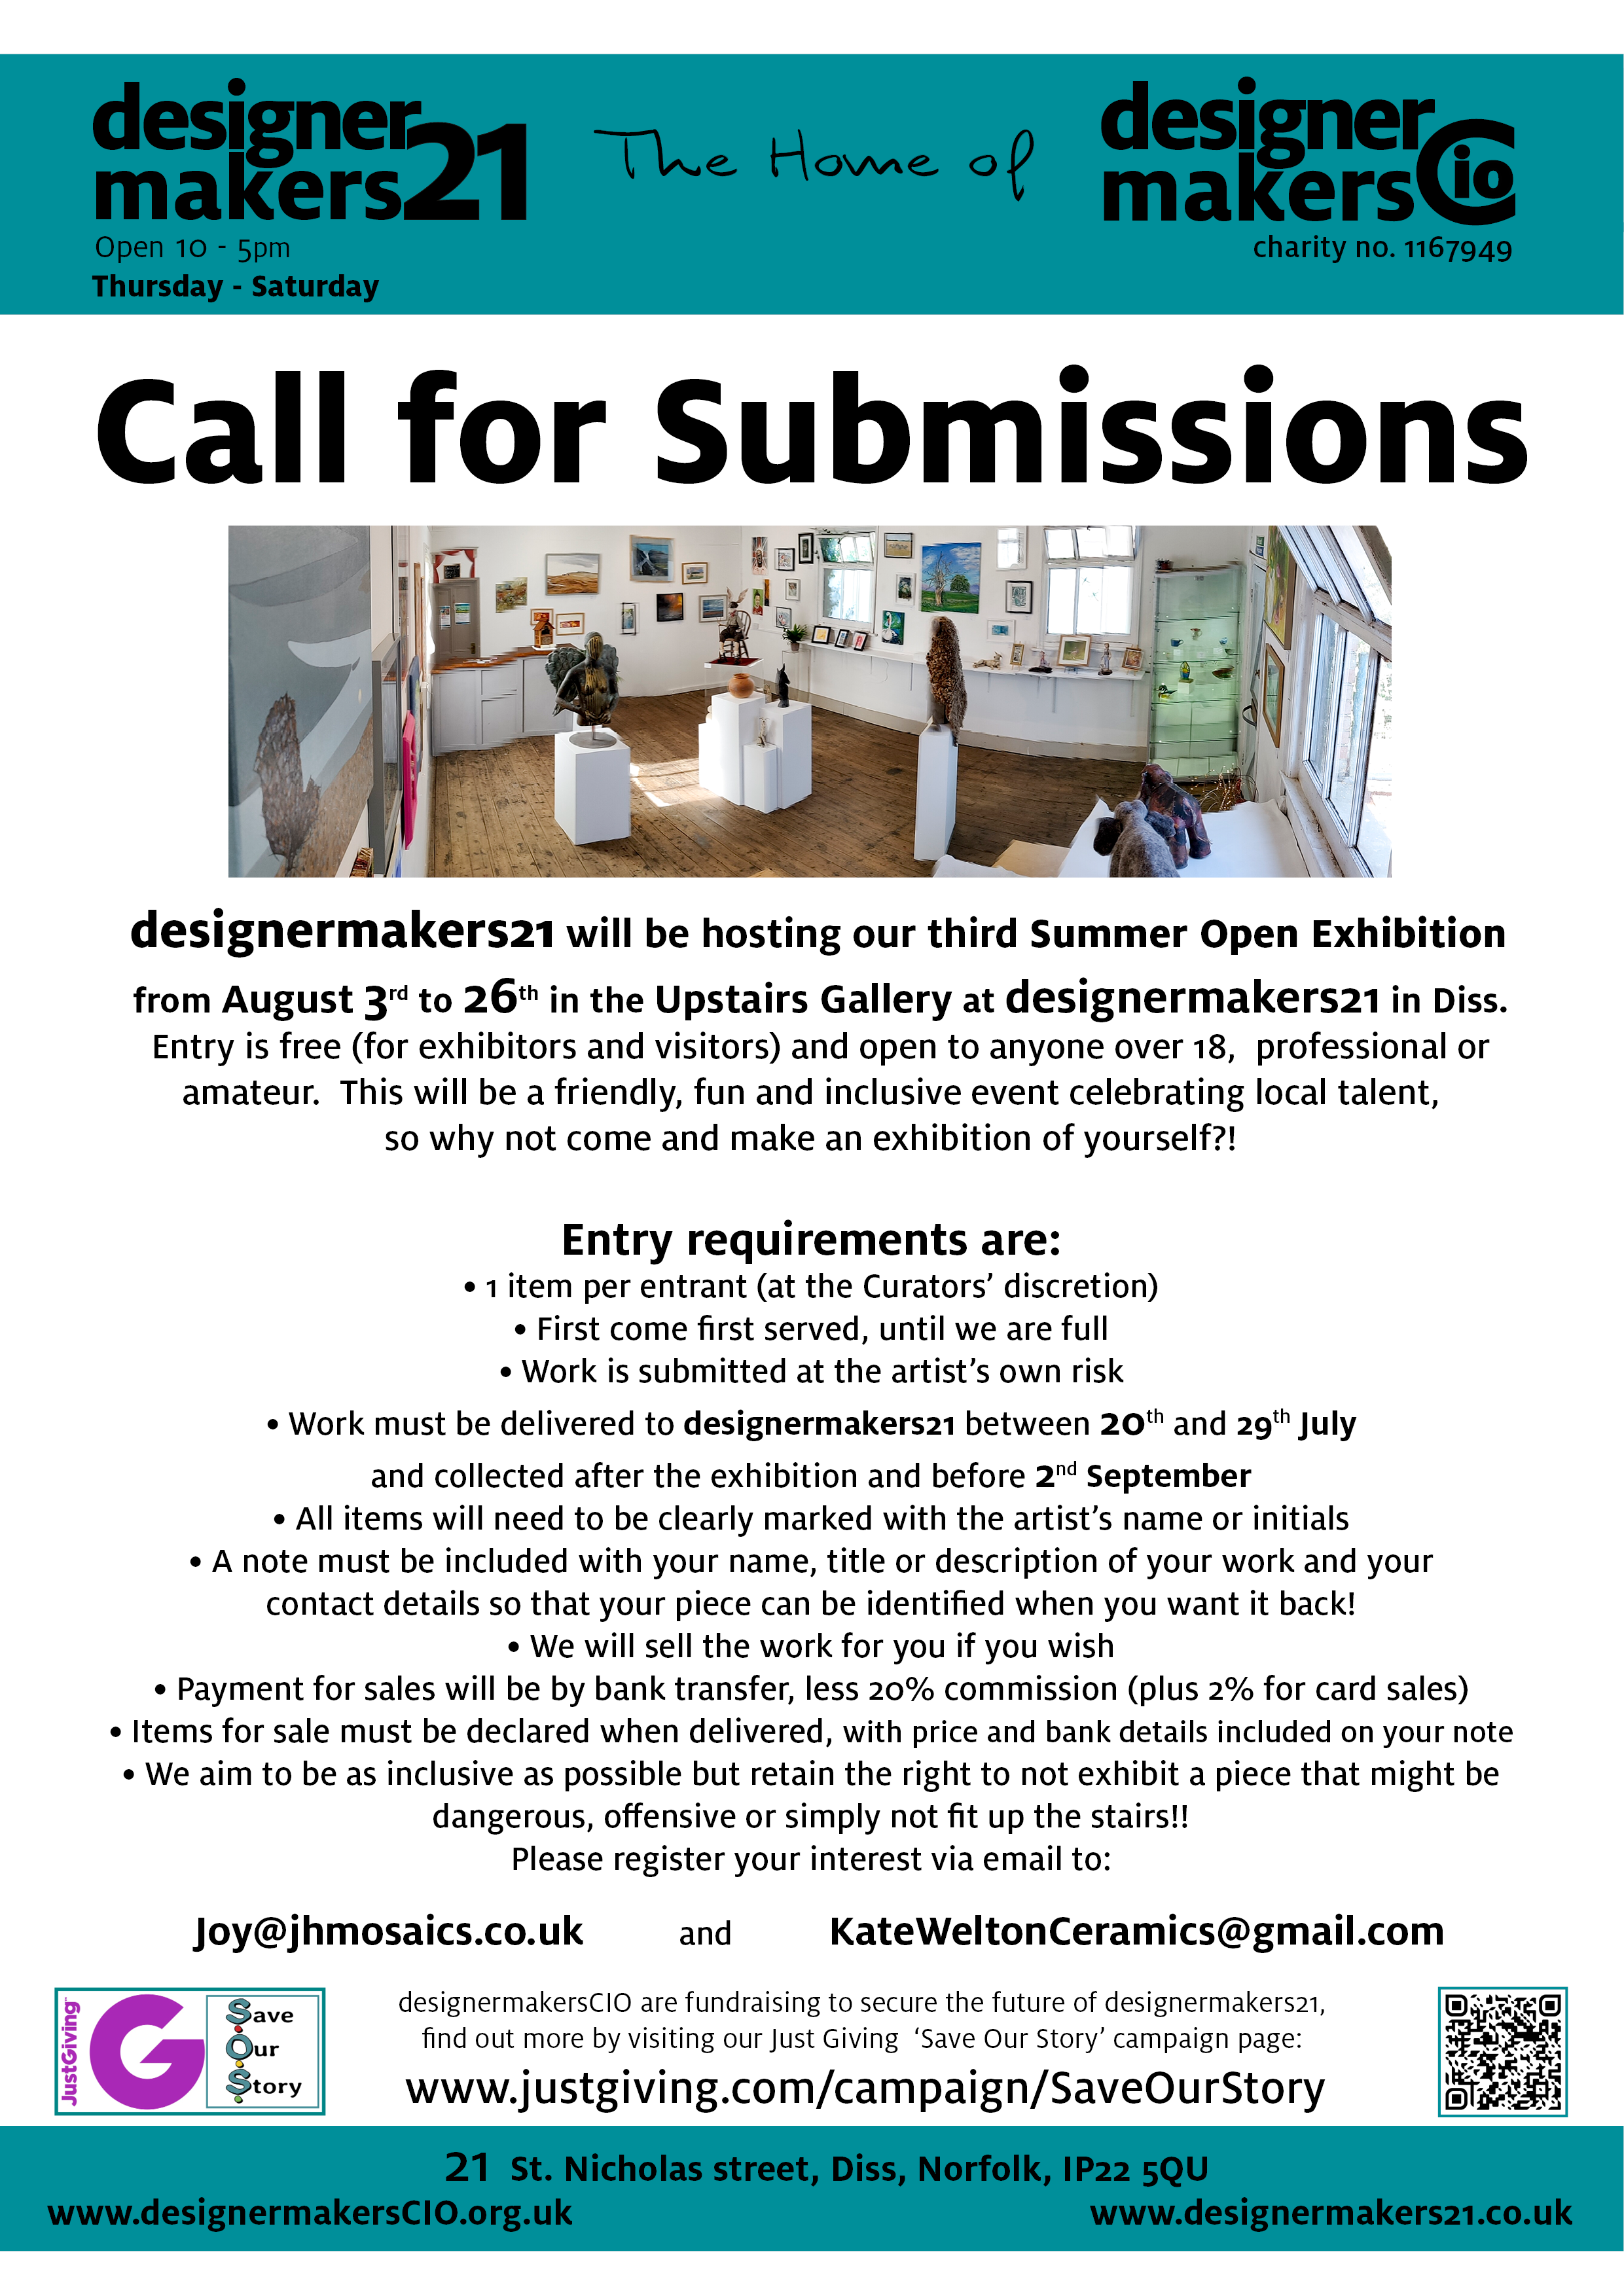 call for submissions poster for designermakers21 summer exhibition 3rd - 26th August 2023